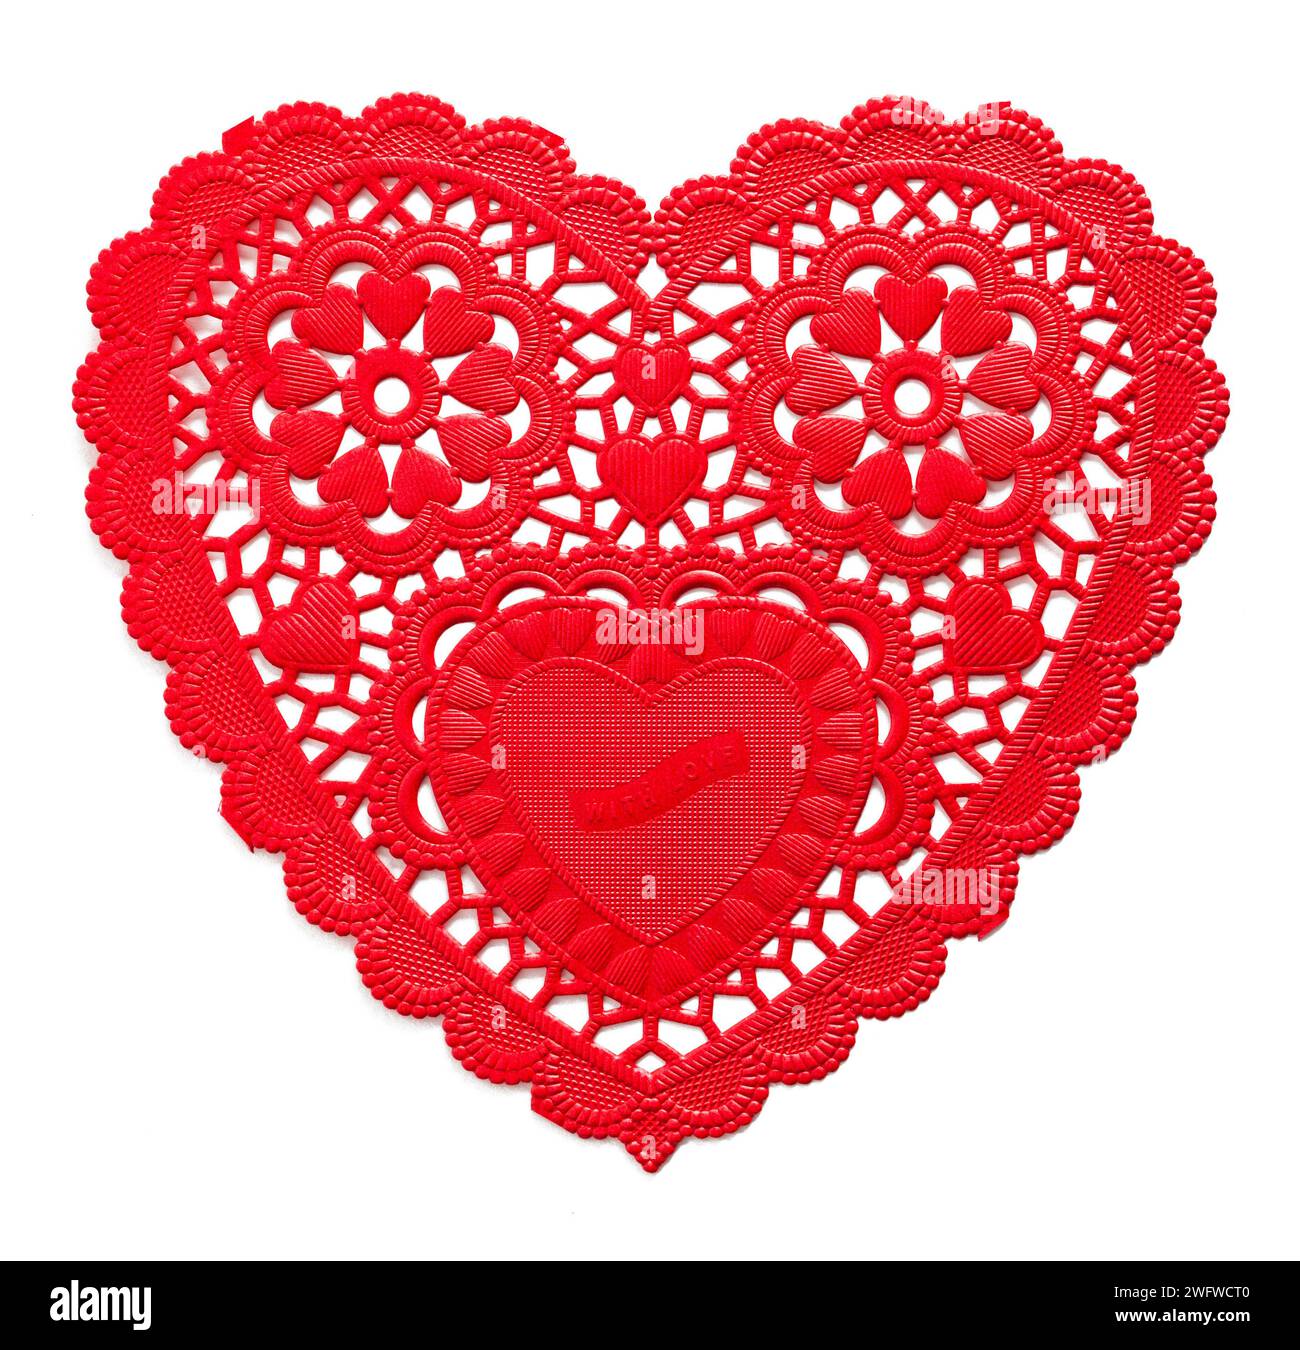 Red Paper Heart Doily Cut Out on White. Stock Photo